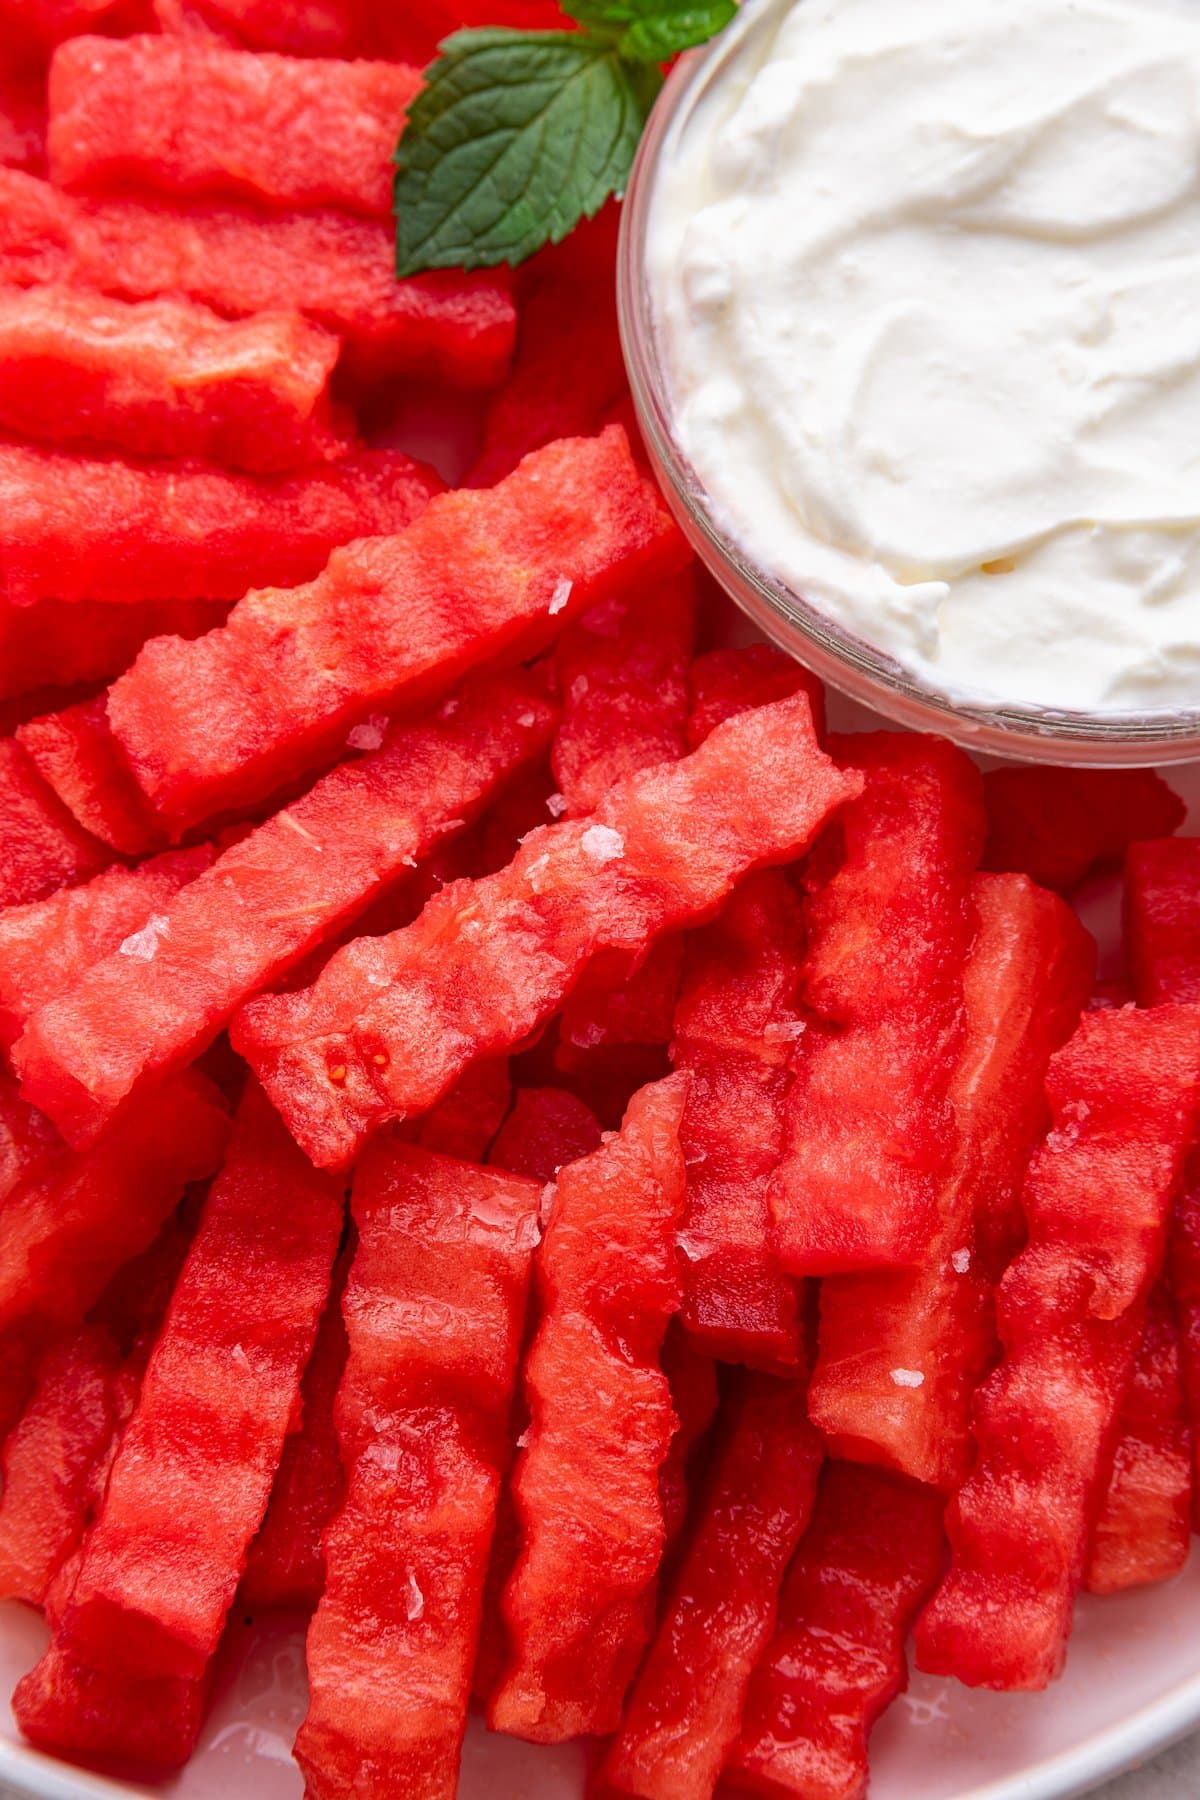 A close up image of watermelon fries on a plate served with a yogurt dip.